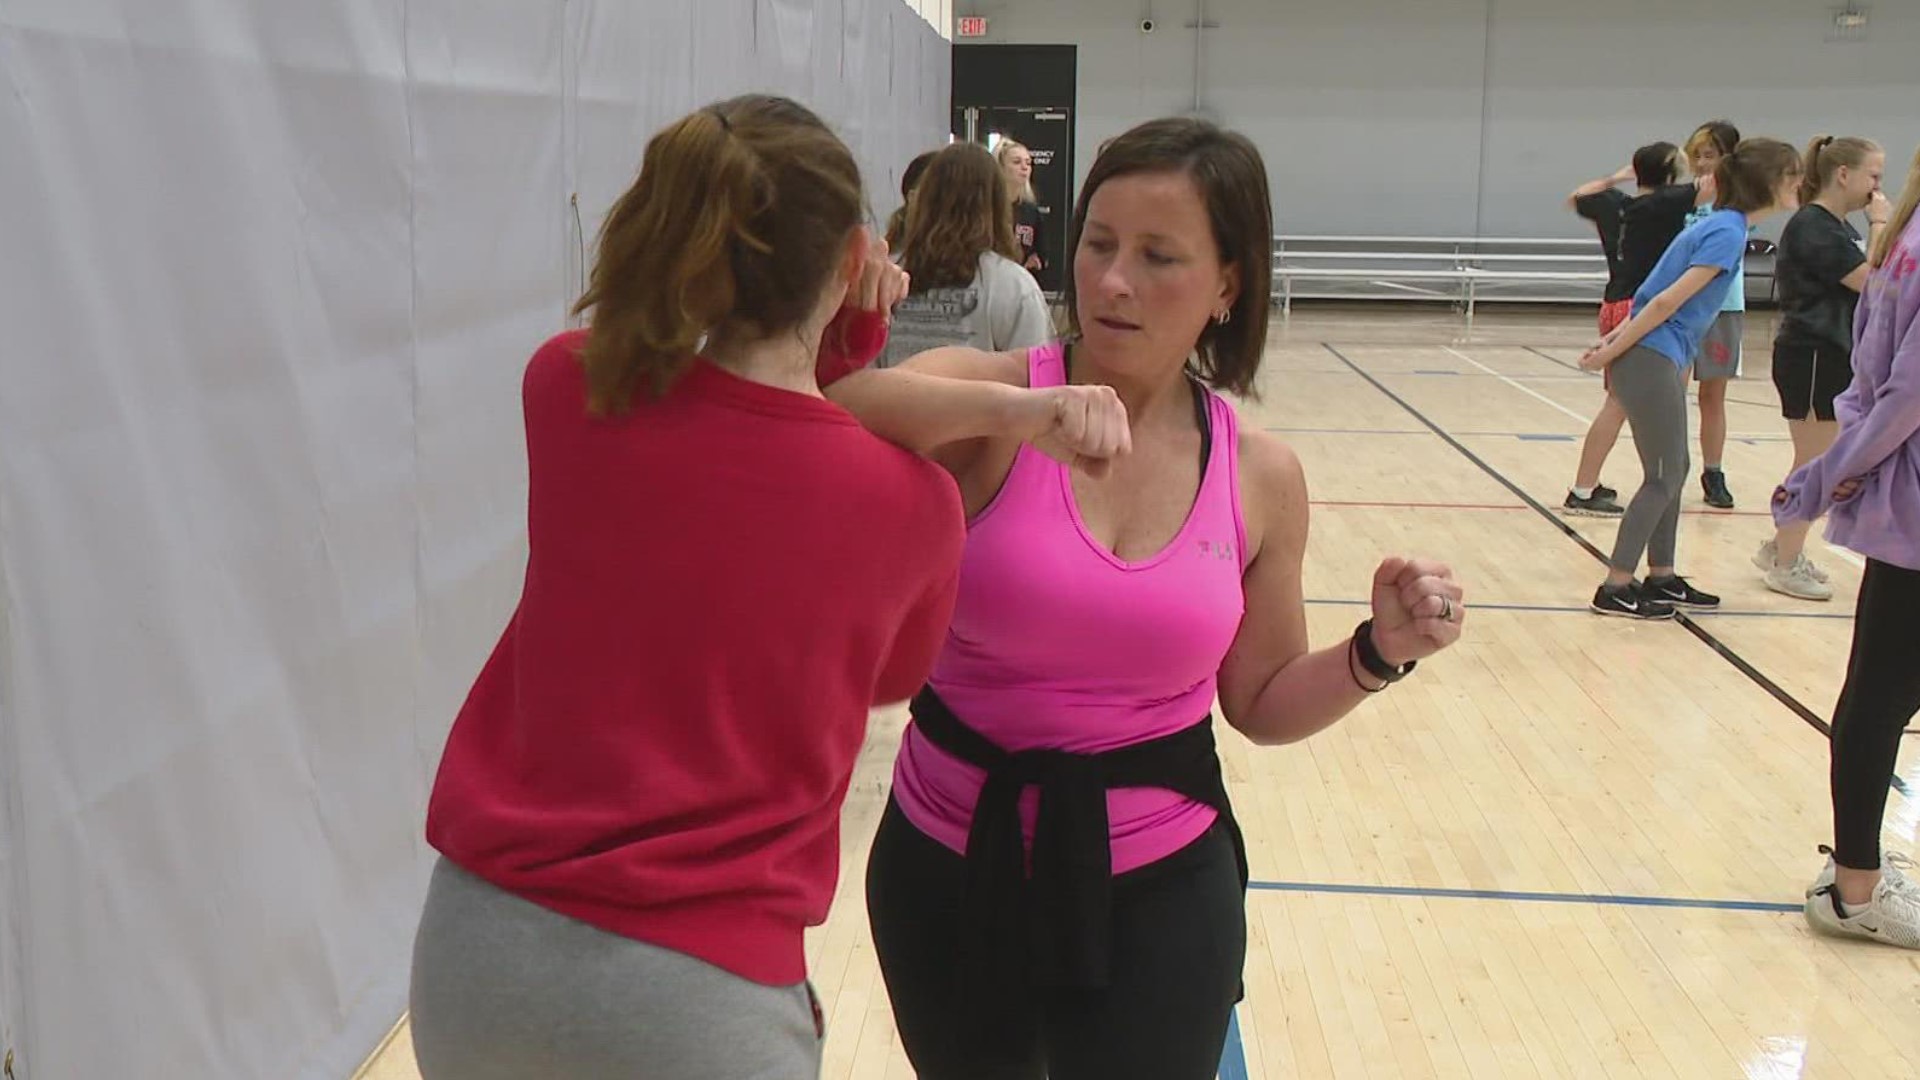 Dozens of women spent several hours Saturday learning how to defend themselves from danger.